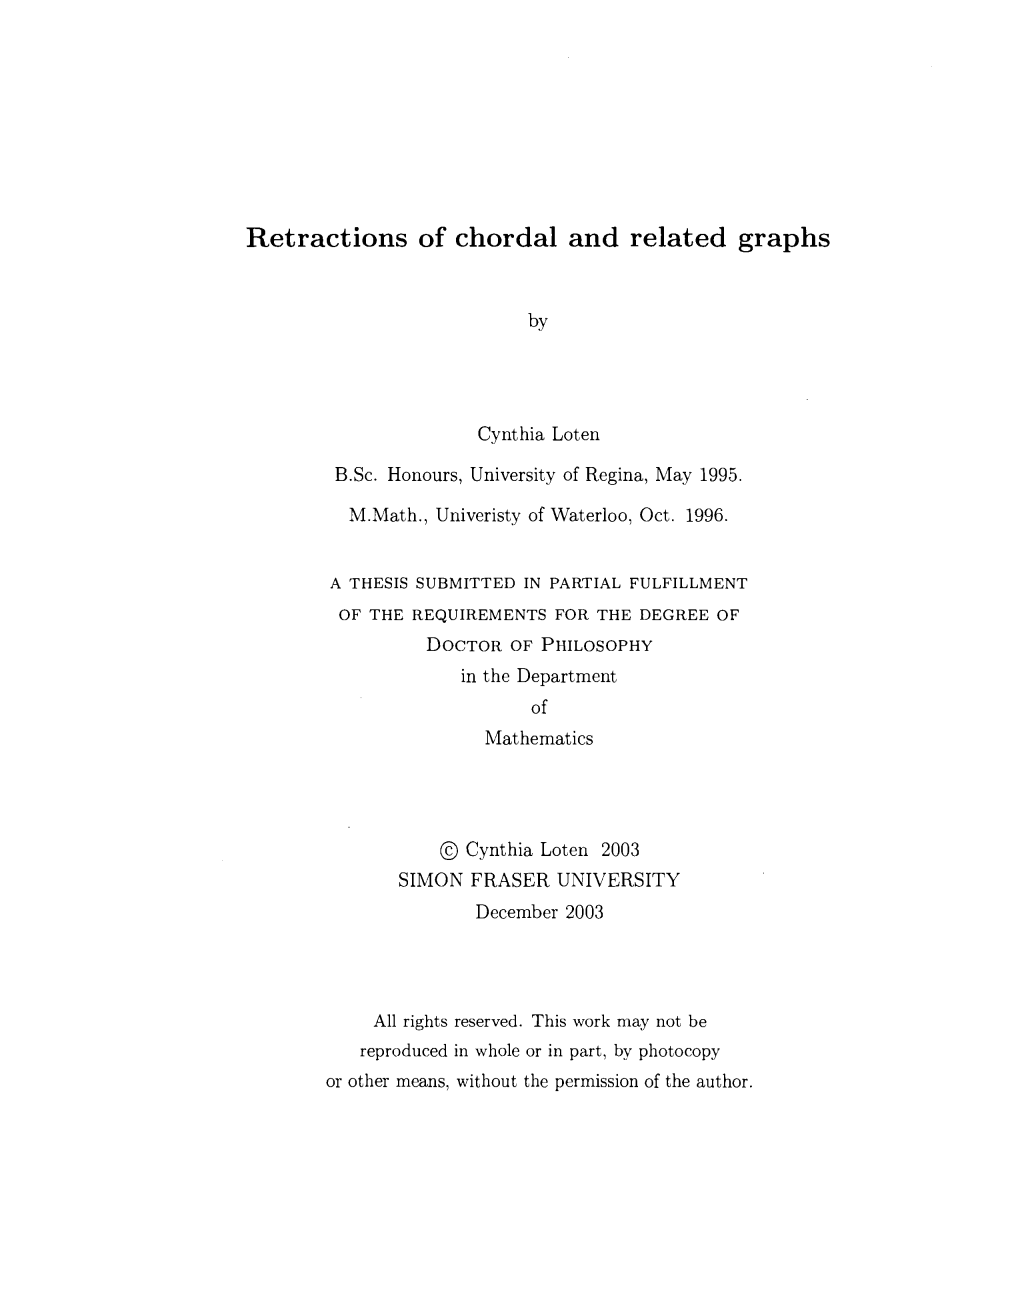 Retractions of Chordal and Related Graphs